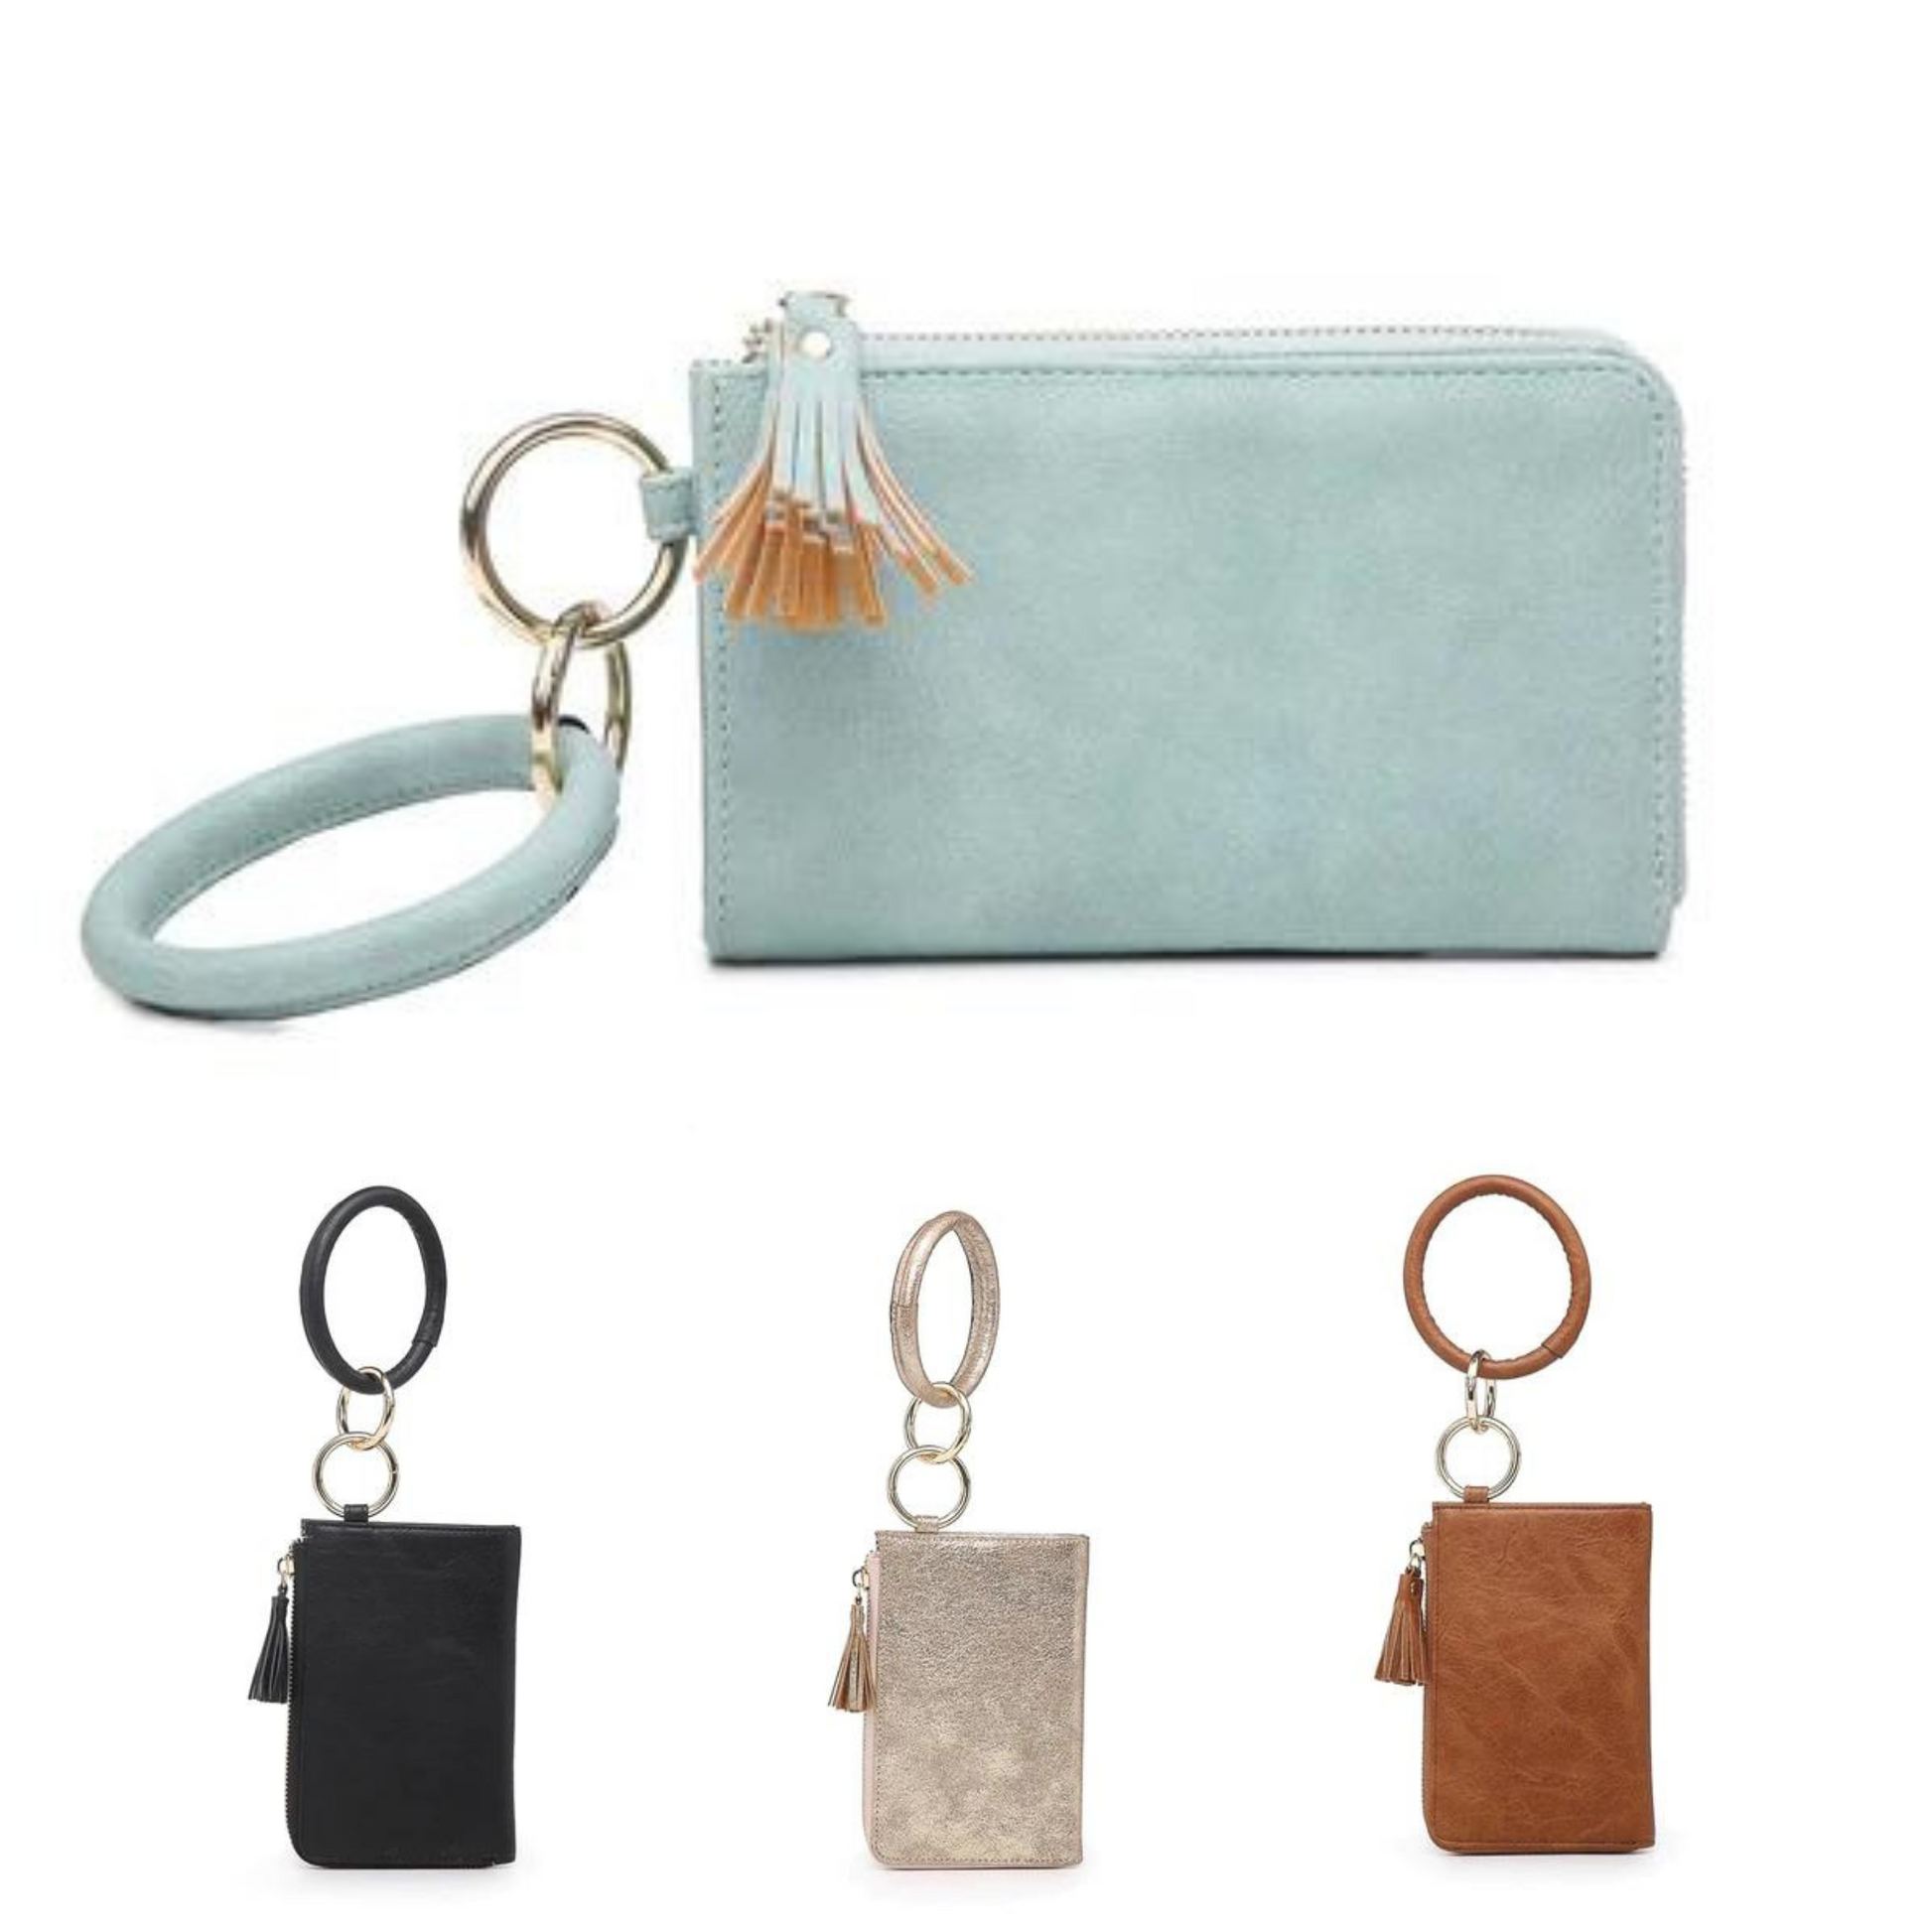 Discover the perfect accessory with this stylish wristlet bangle wallet. It's available in four eye-catching colors - black, teal, gold, and brown - and is perfect for every occasion. Its chic design makes it a great everyday piece for anyone looking to take their style to the next level.